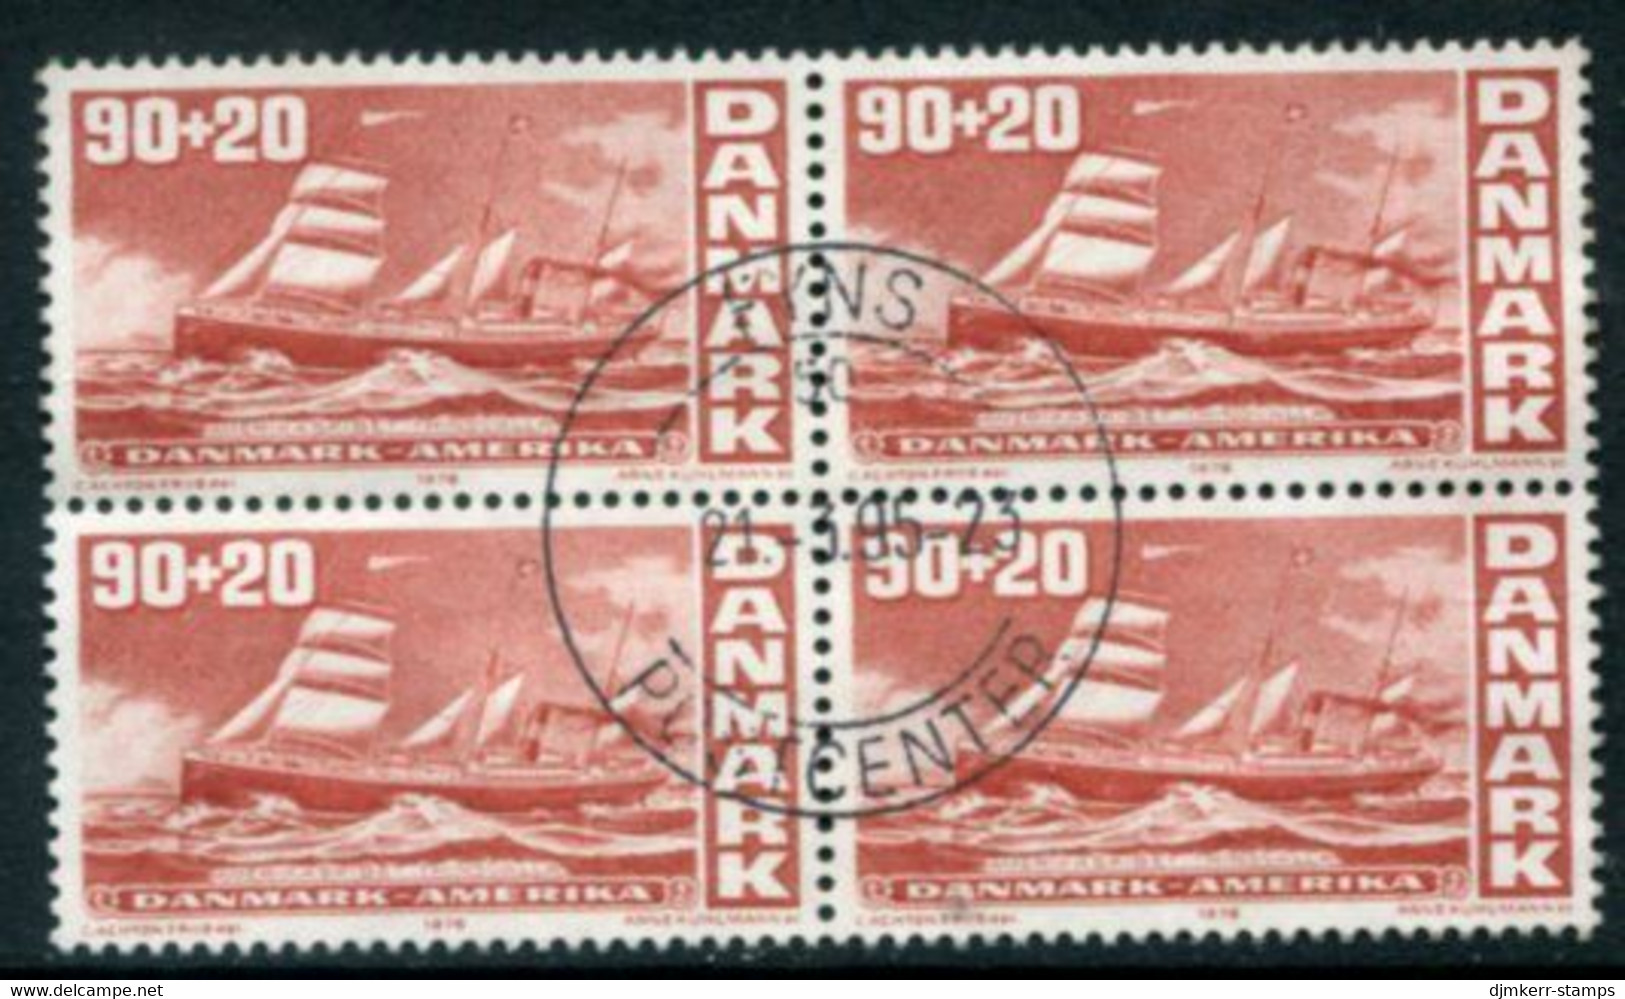 DENMARK 1976 Bicentenary Of US Independence 90+20 Øre. Block Of 4 Used   Michel 612 - Used Stamps